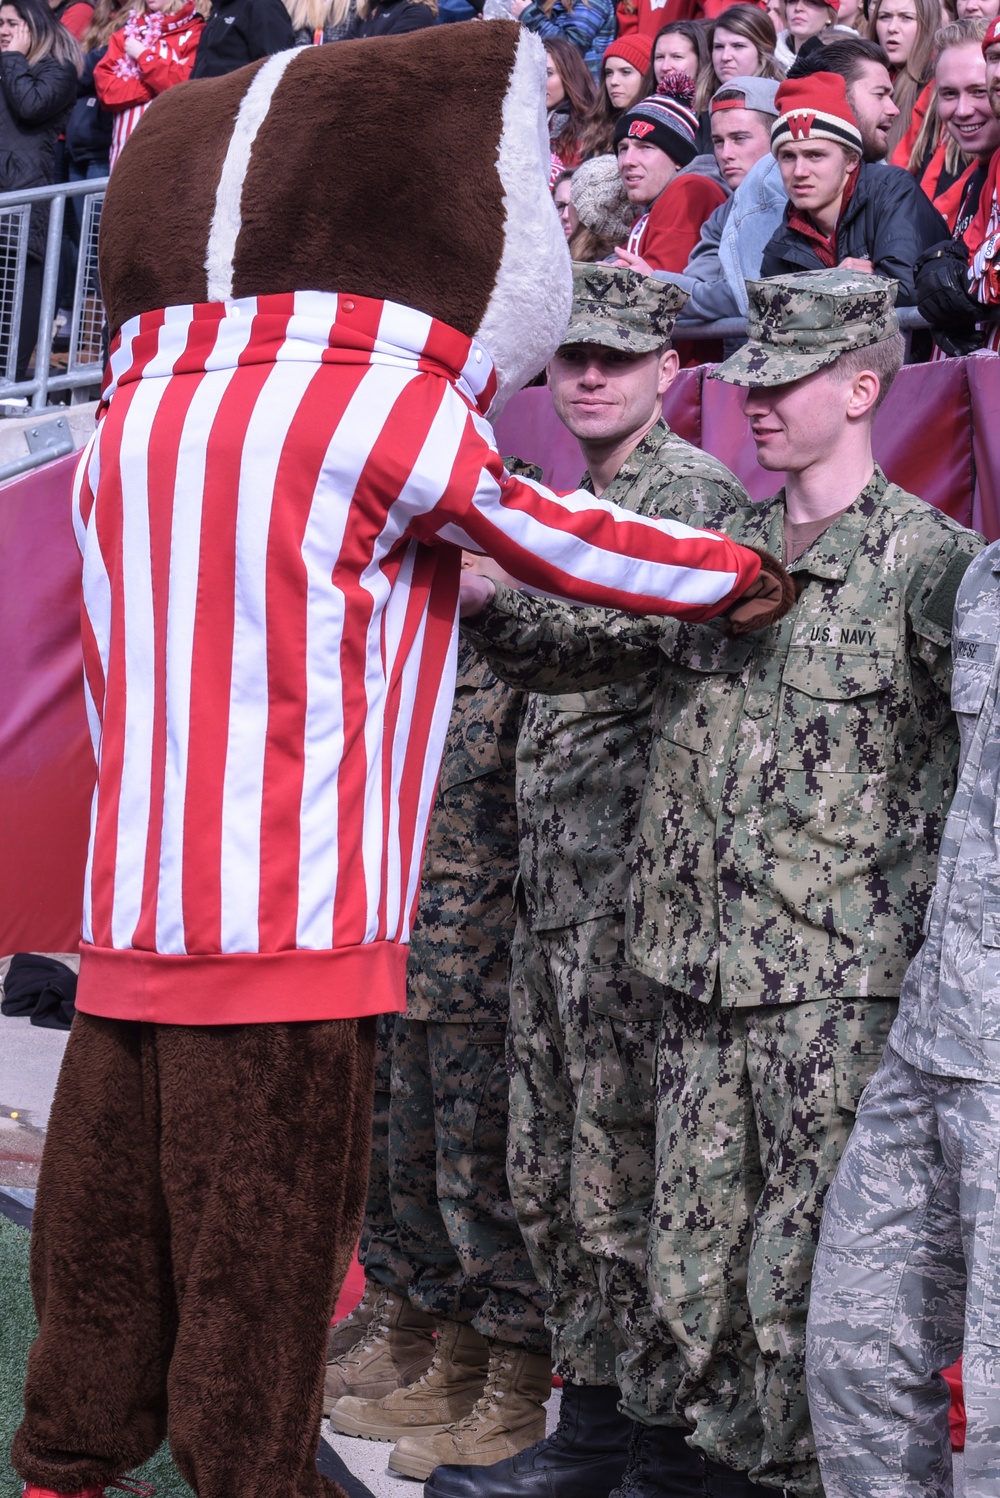 University of Wisconsin-Madison shows military appreciation